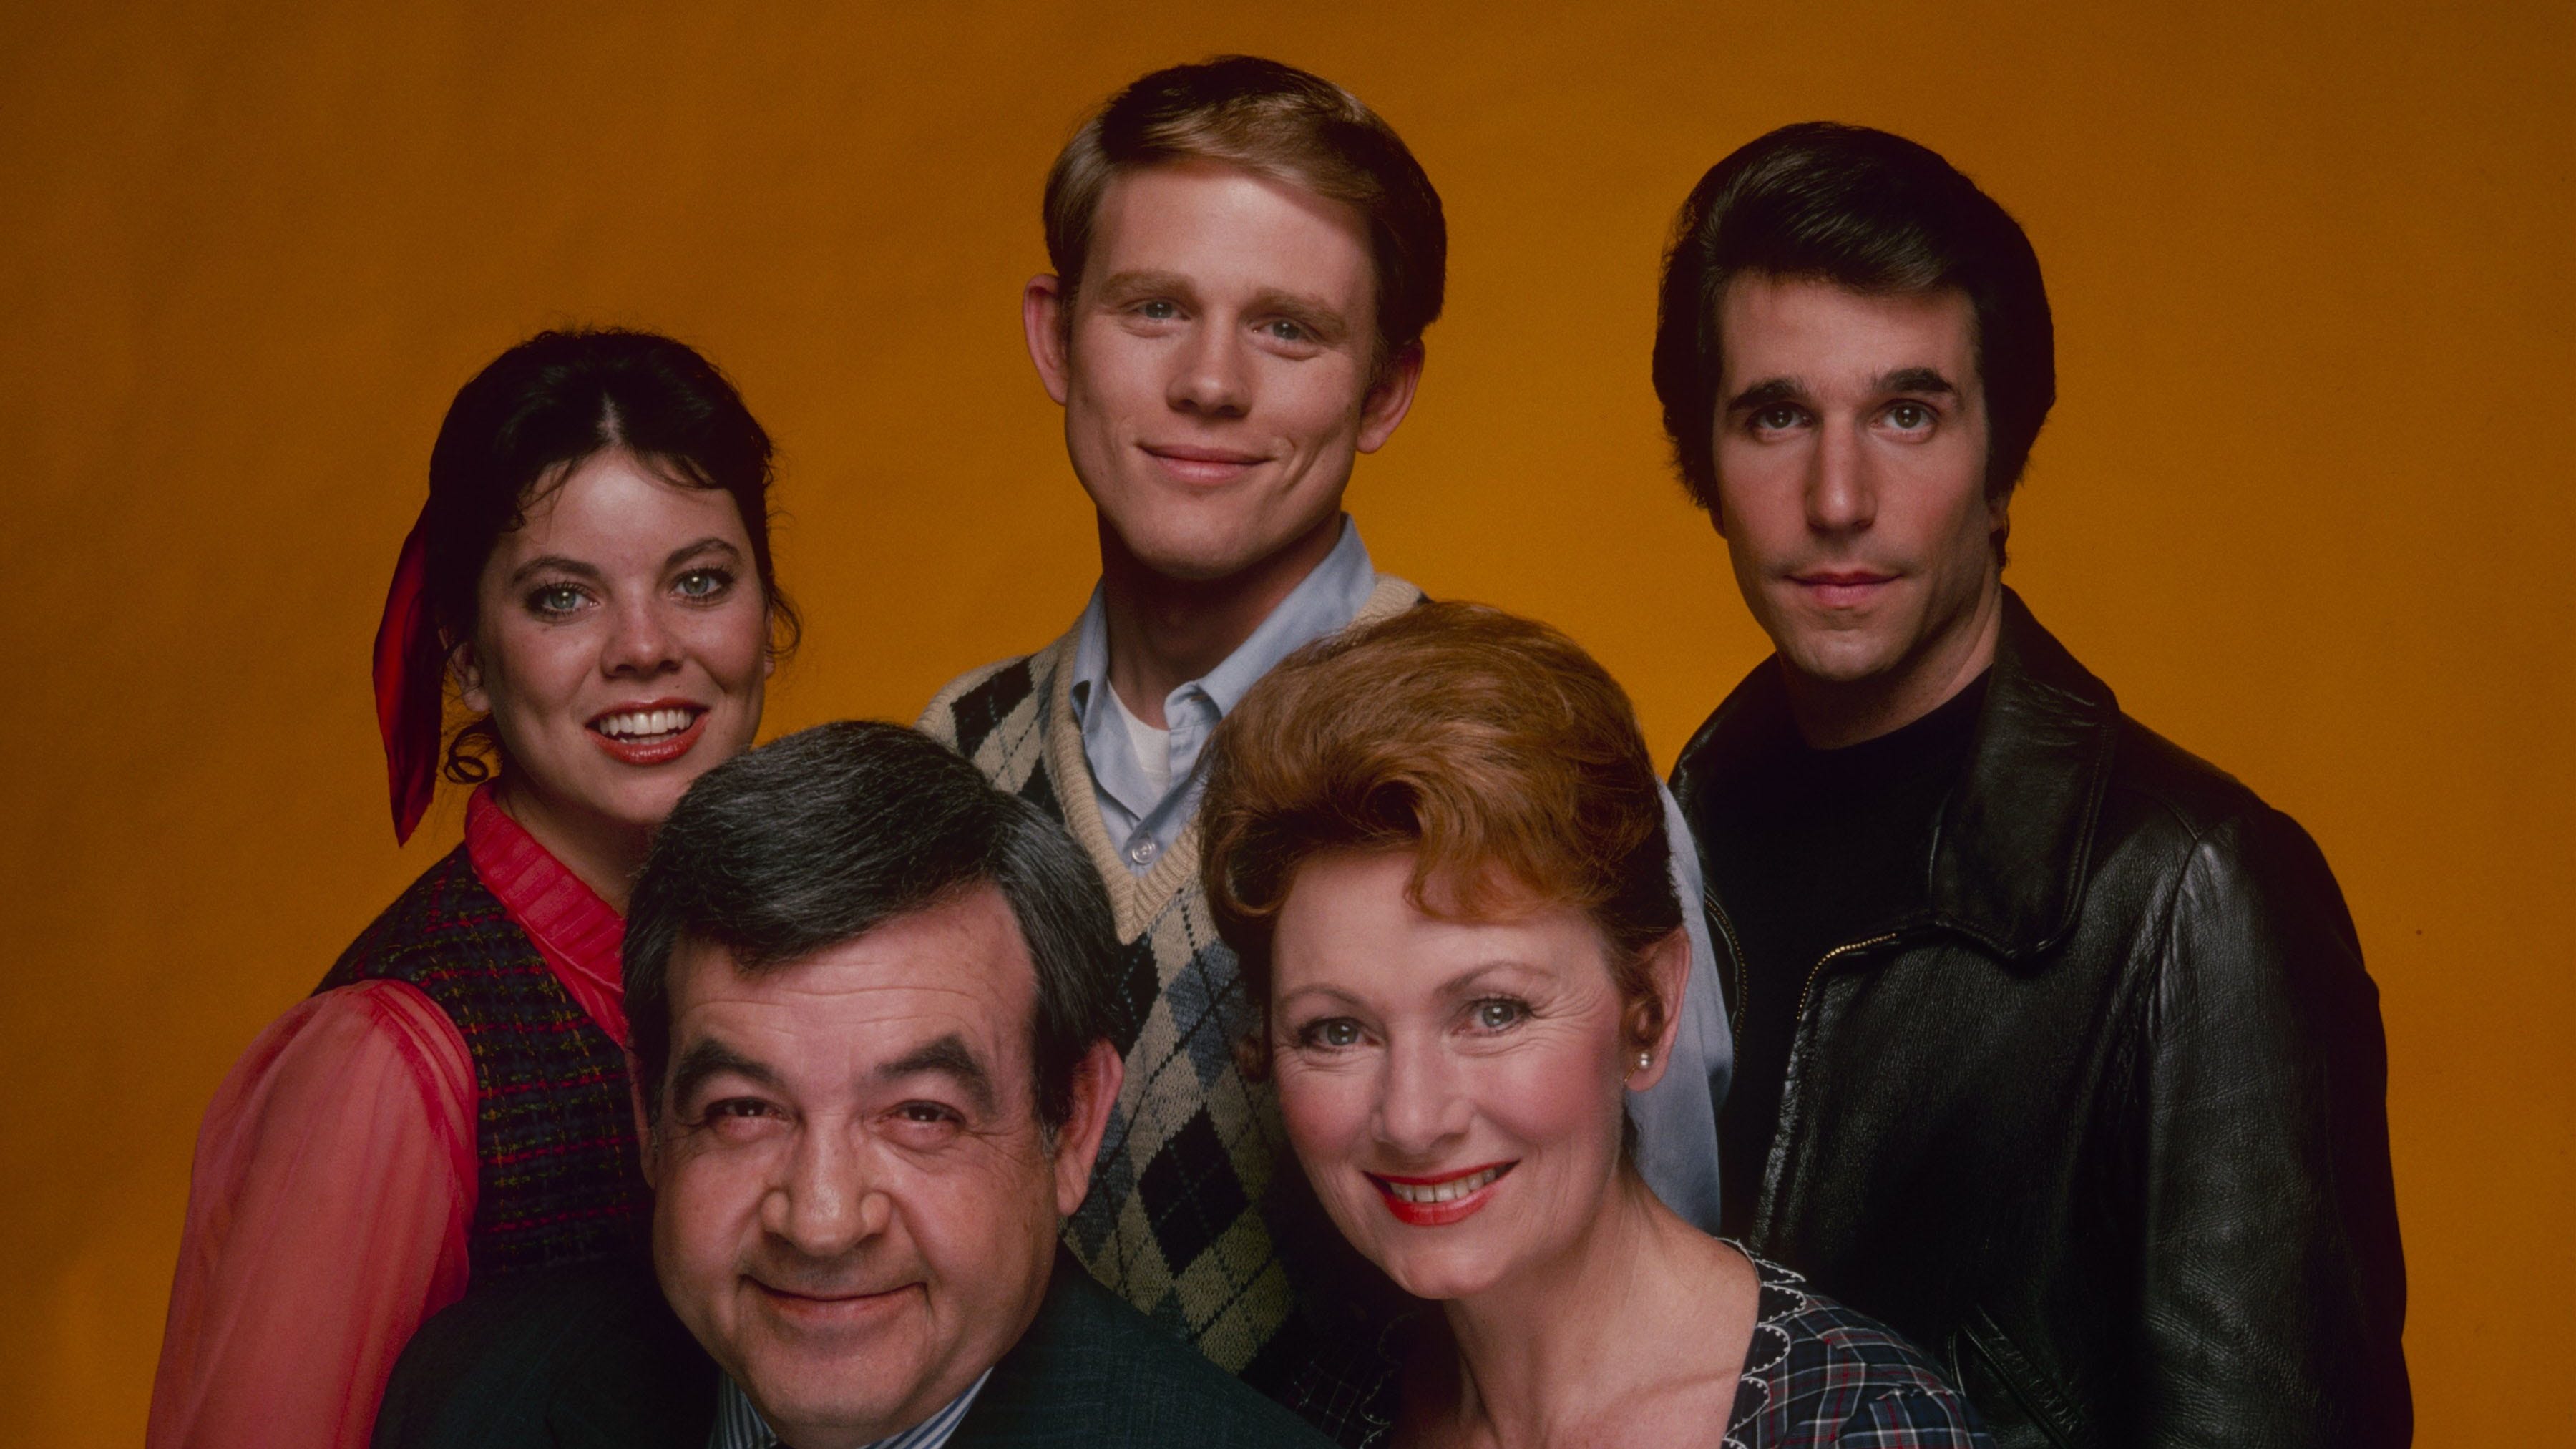 'Happy Days' stars: Where are they now?